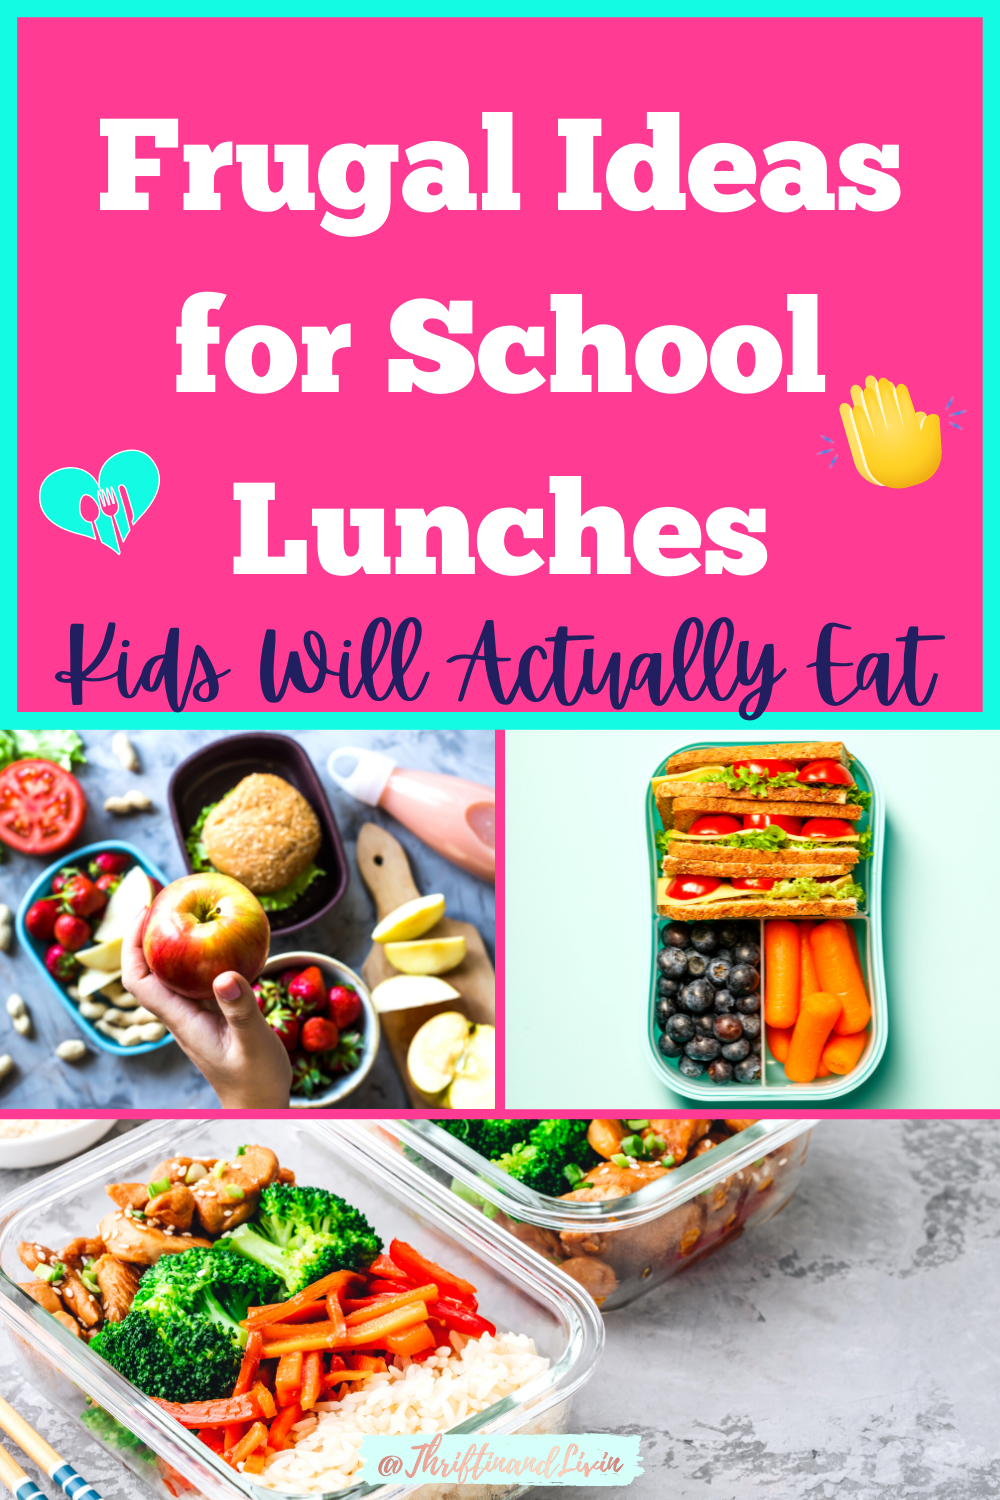 Pinterest Image - Frugal Ideas for School Lunches Kids Will Actually Eat.